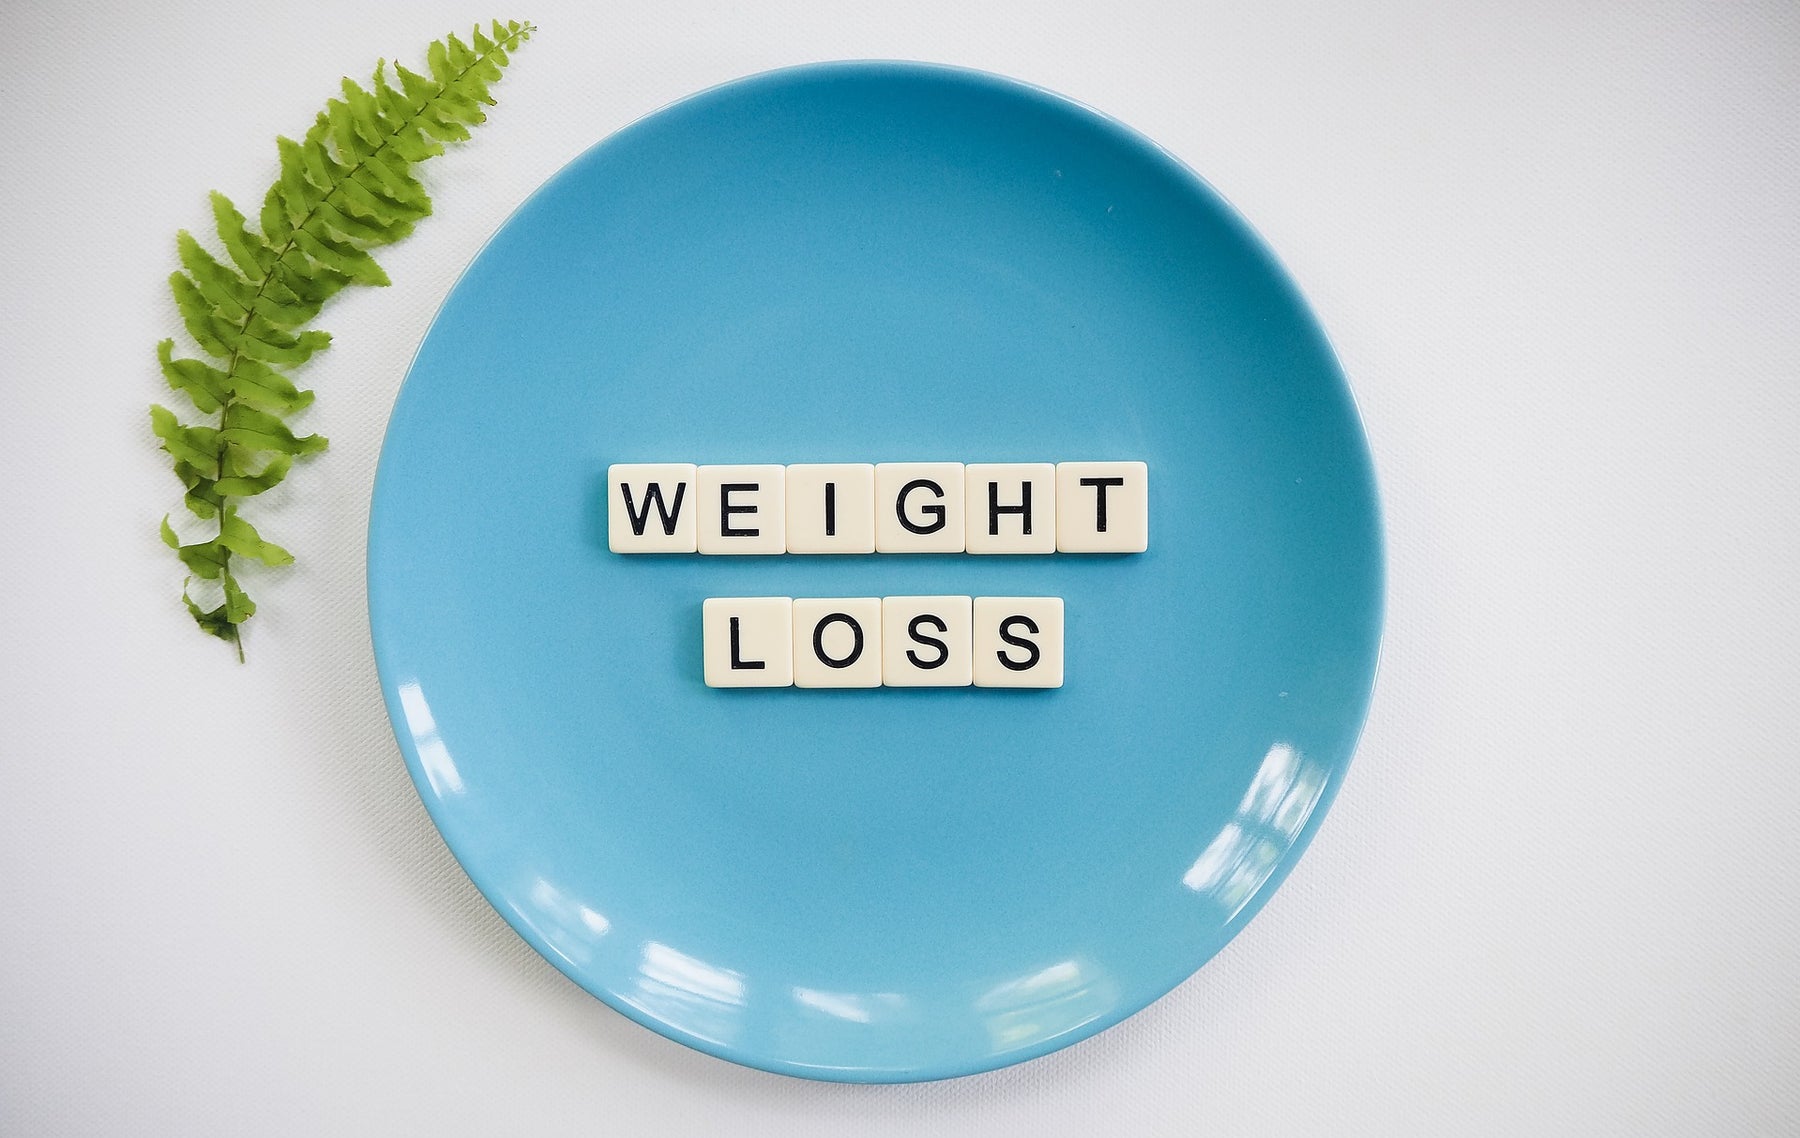 Leaf next to a blue plate that reads weight loss